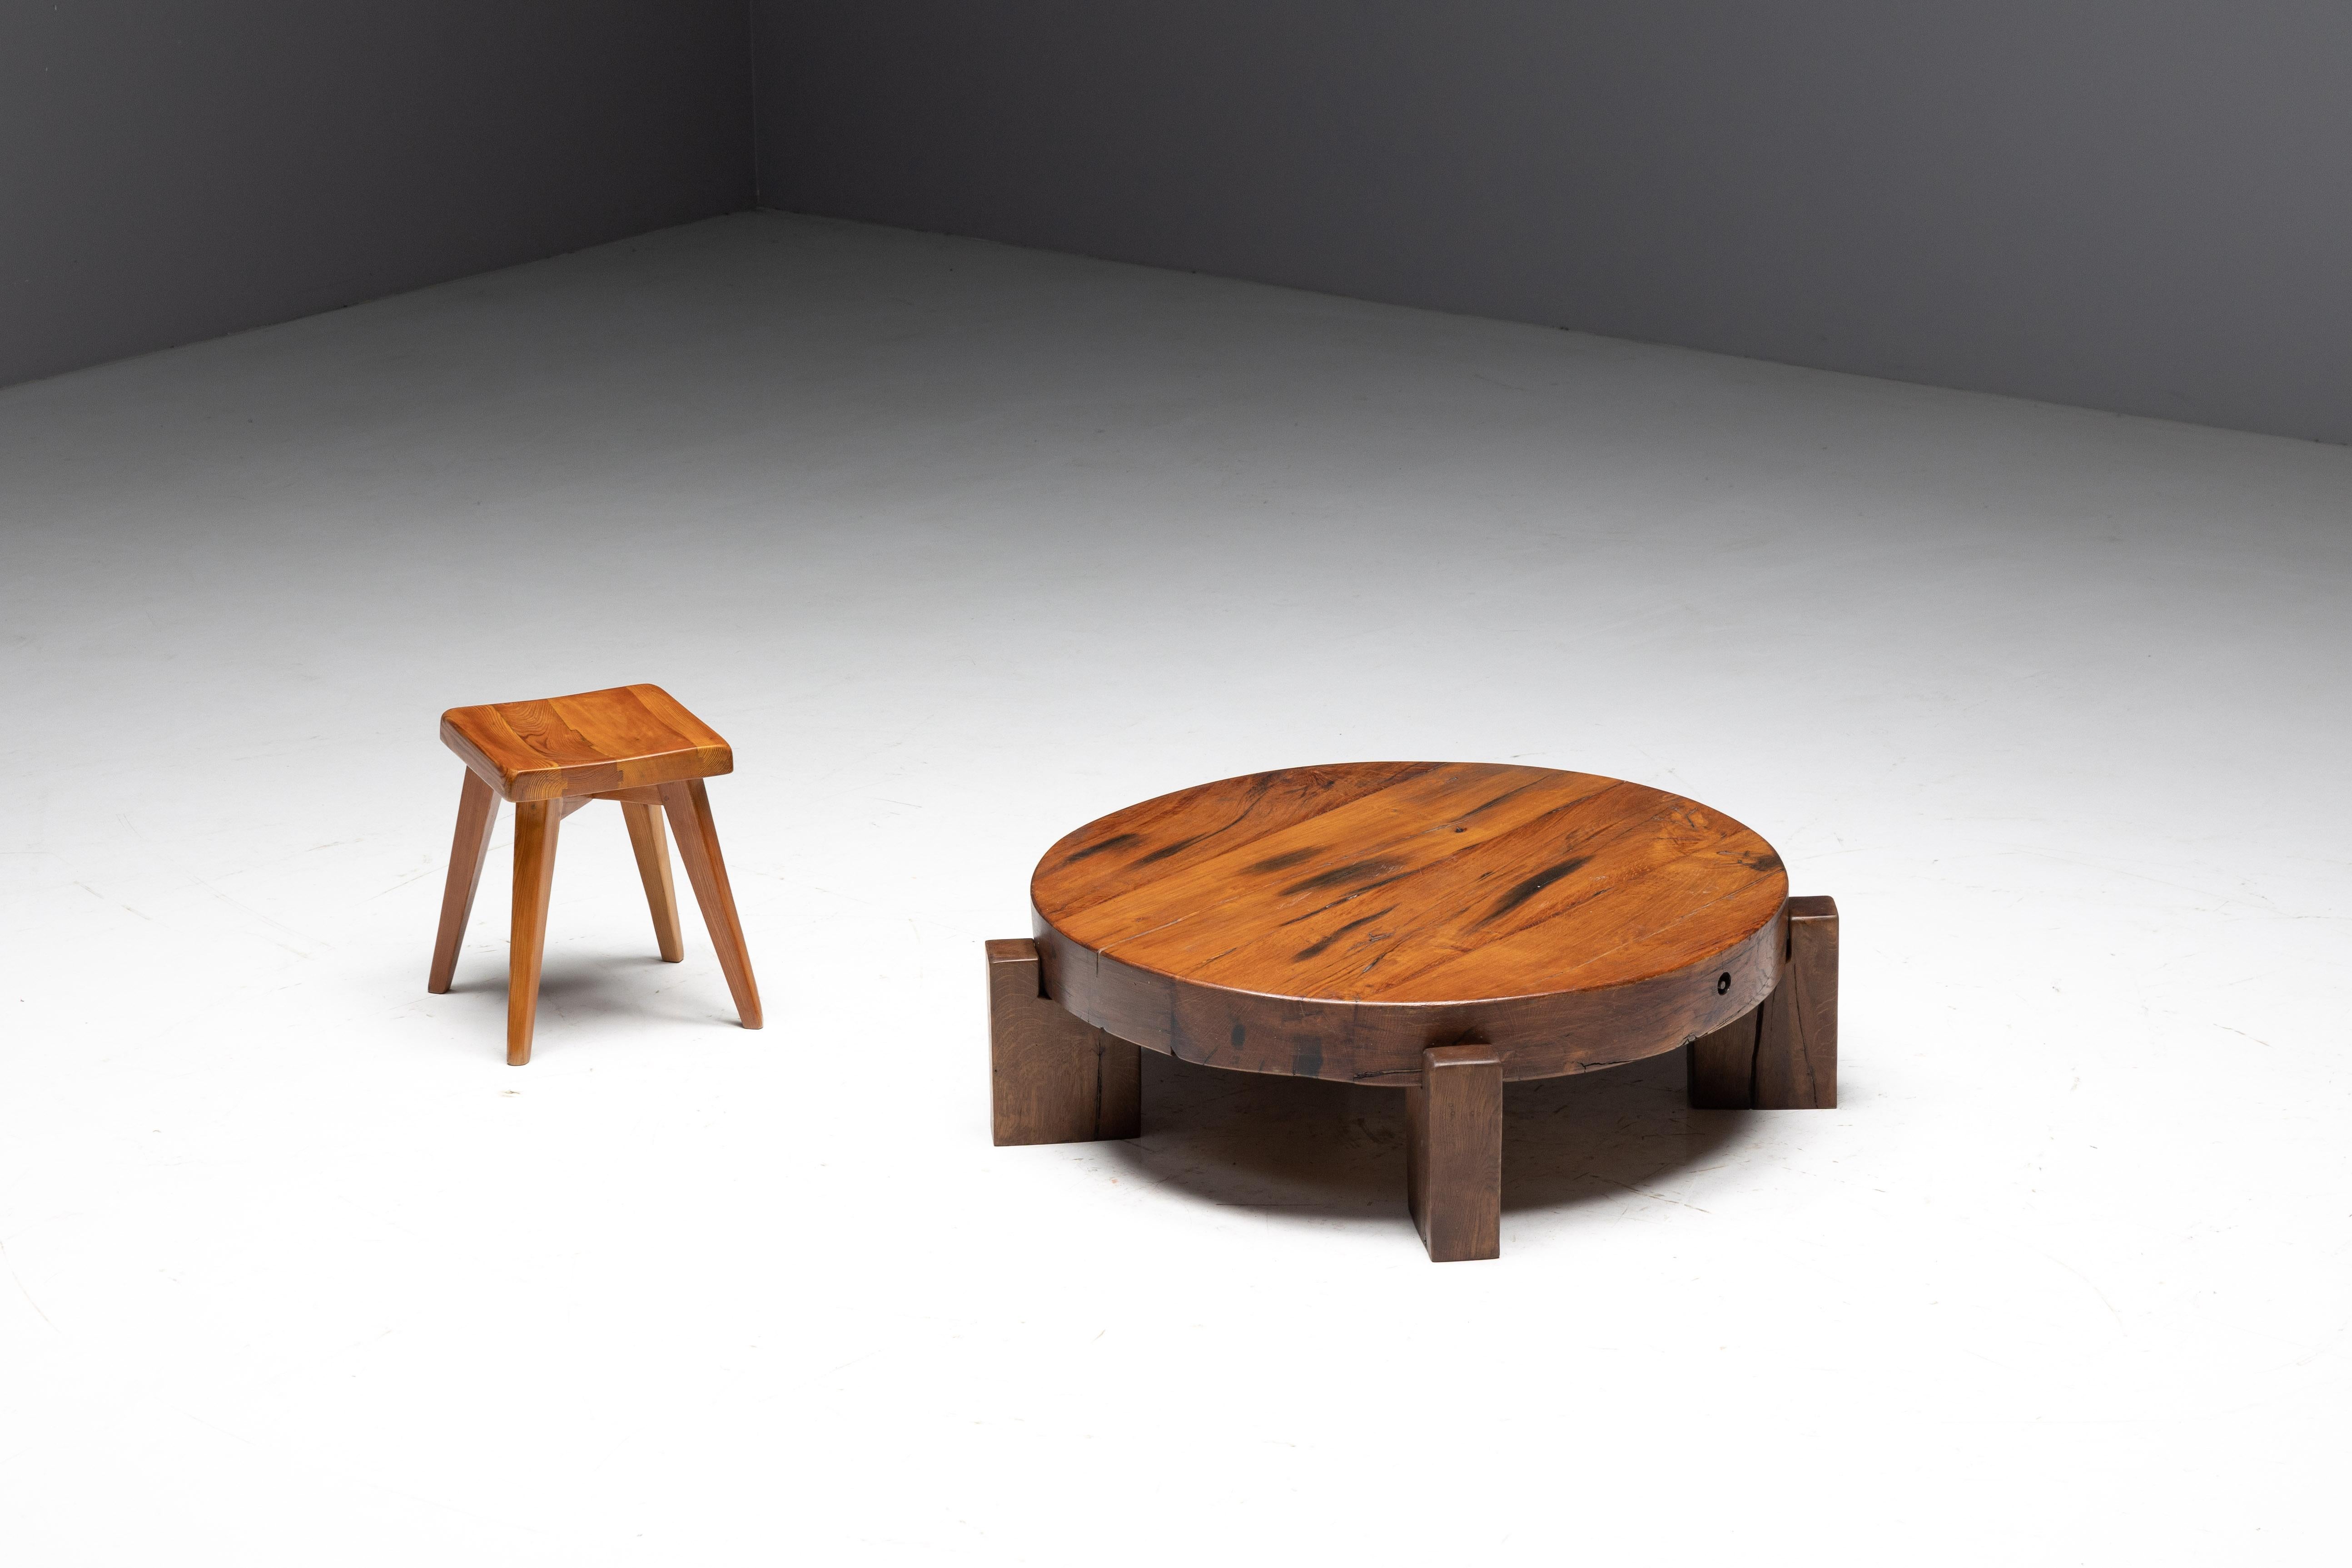 Brutalist round wooden coffee table with a four-legged base, crafted from solid wood with a charismatic patina. Its seamless integration of tabletop and legs offers a unique twist, making it a standout piece in any setting. With plenty of surface